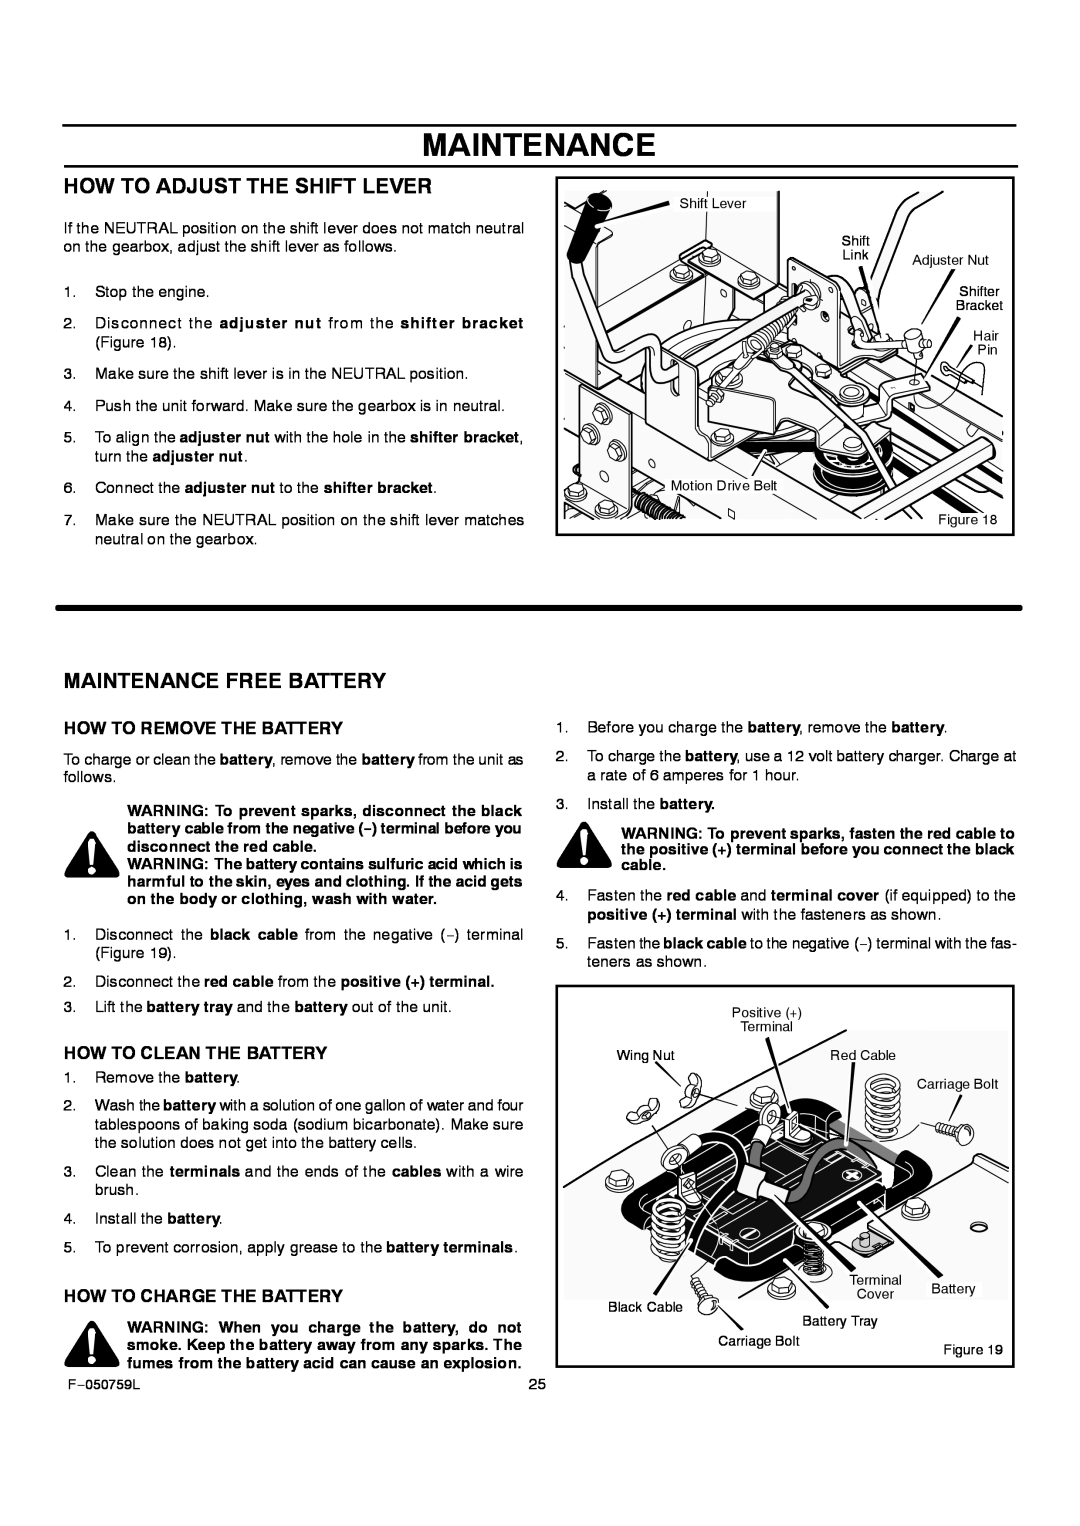 Rover 405012x108A owner manual How To Adjust The Shift Lever, Maintenance Free Battery, How To Remove The Battery 